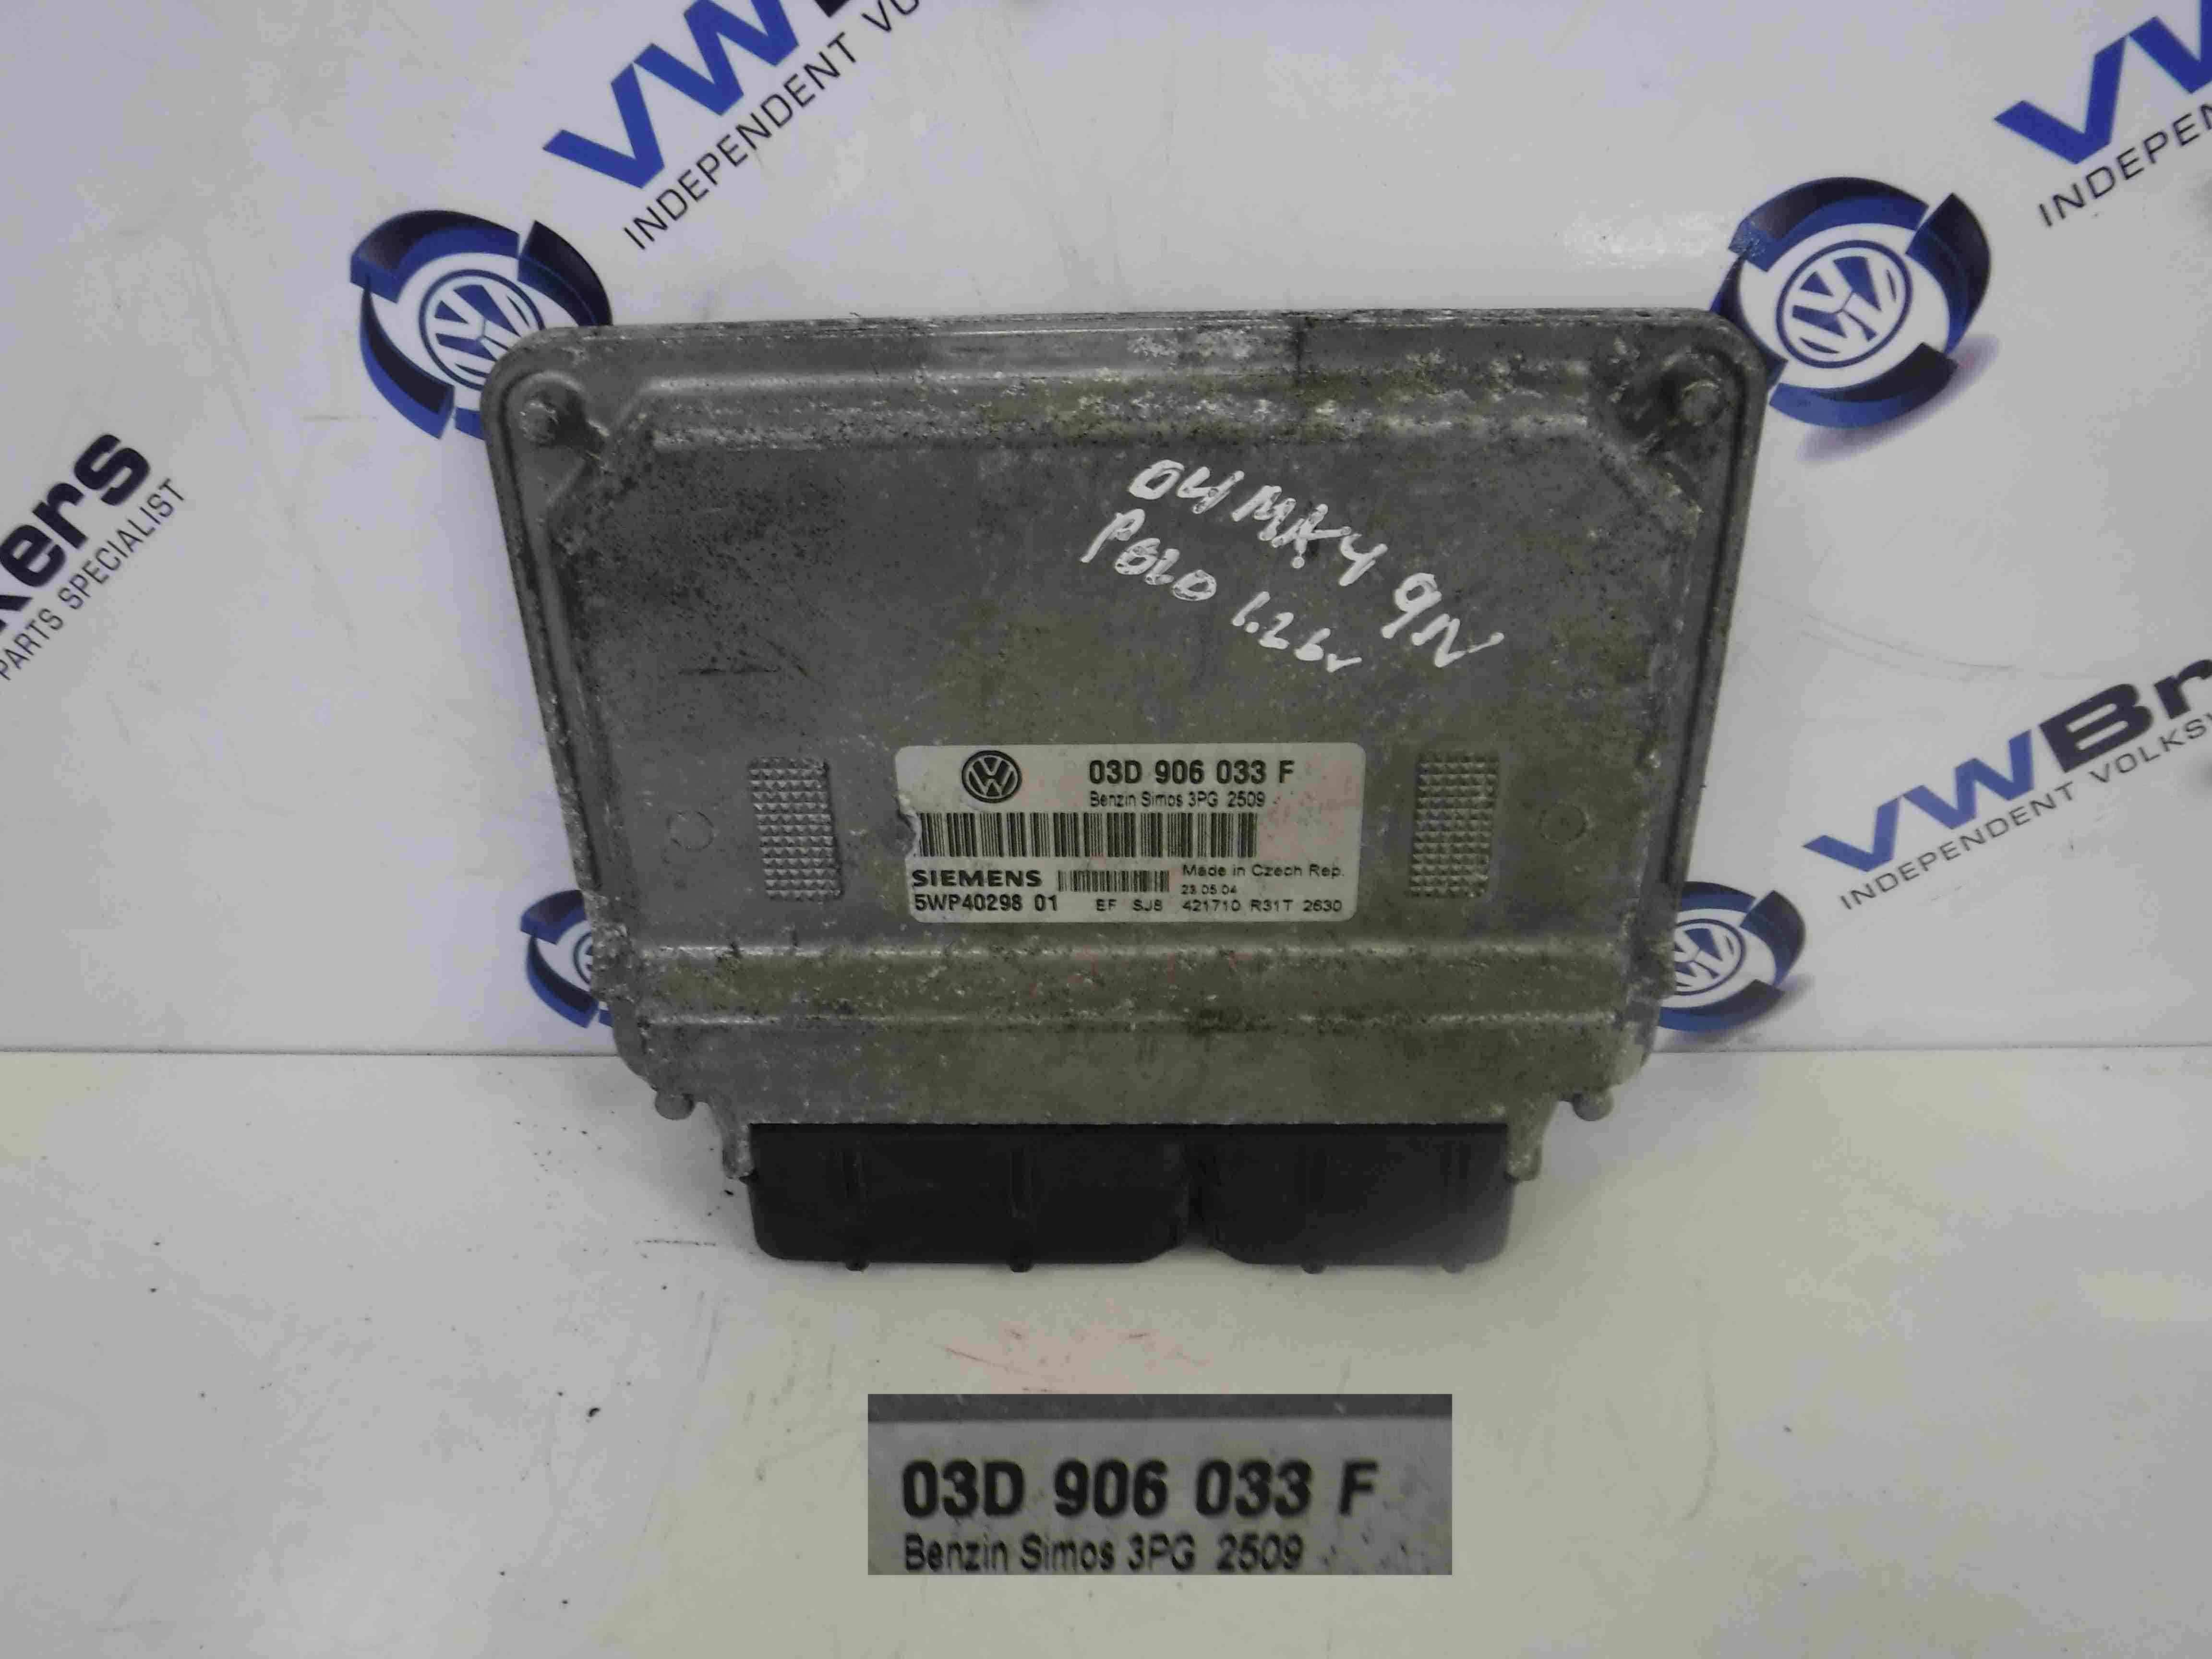 Volkswagen Polo 2003-2008 9N 9N3 Engine Control Unit Computer 03D906033F